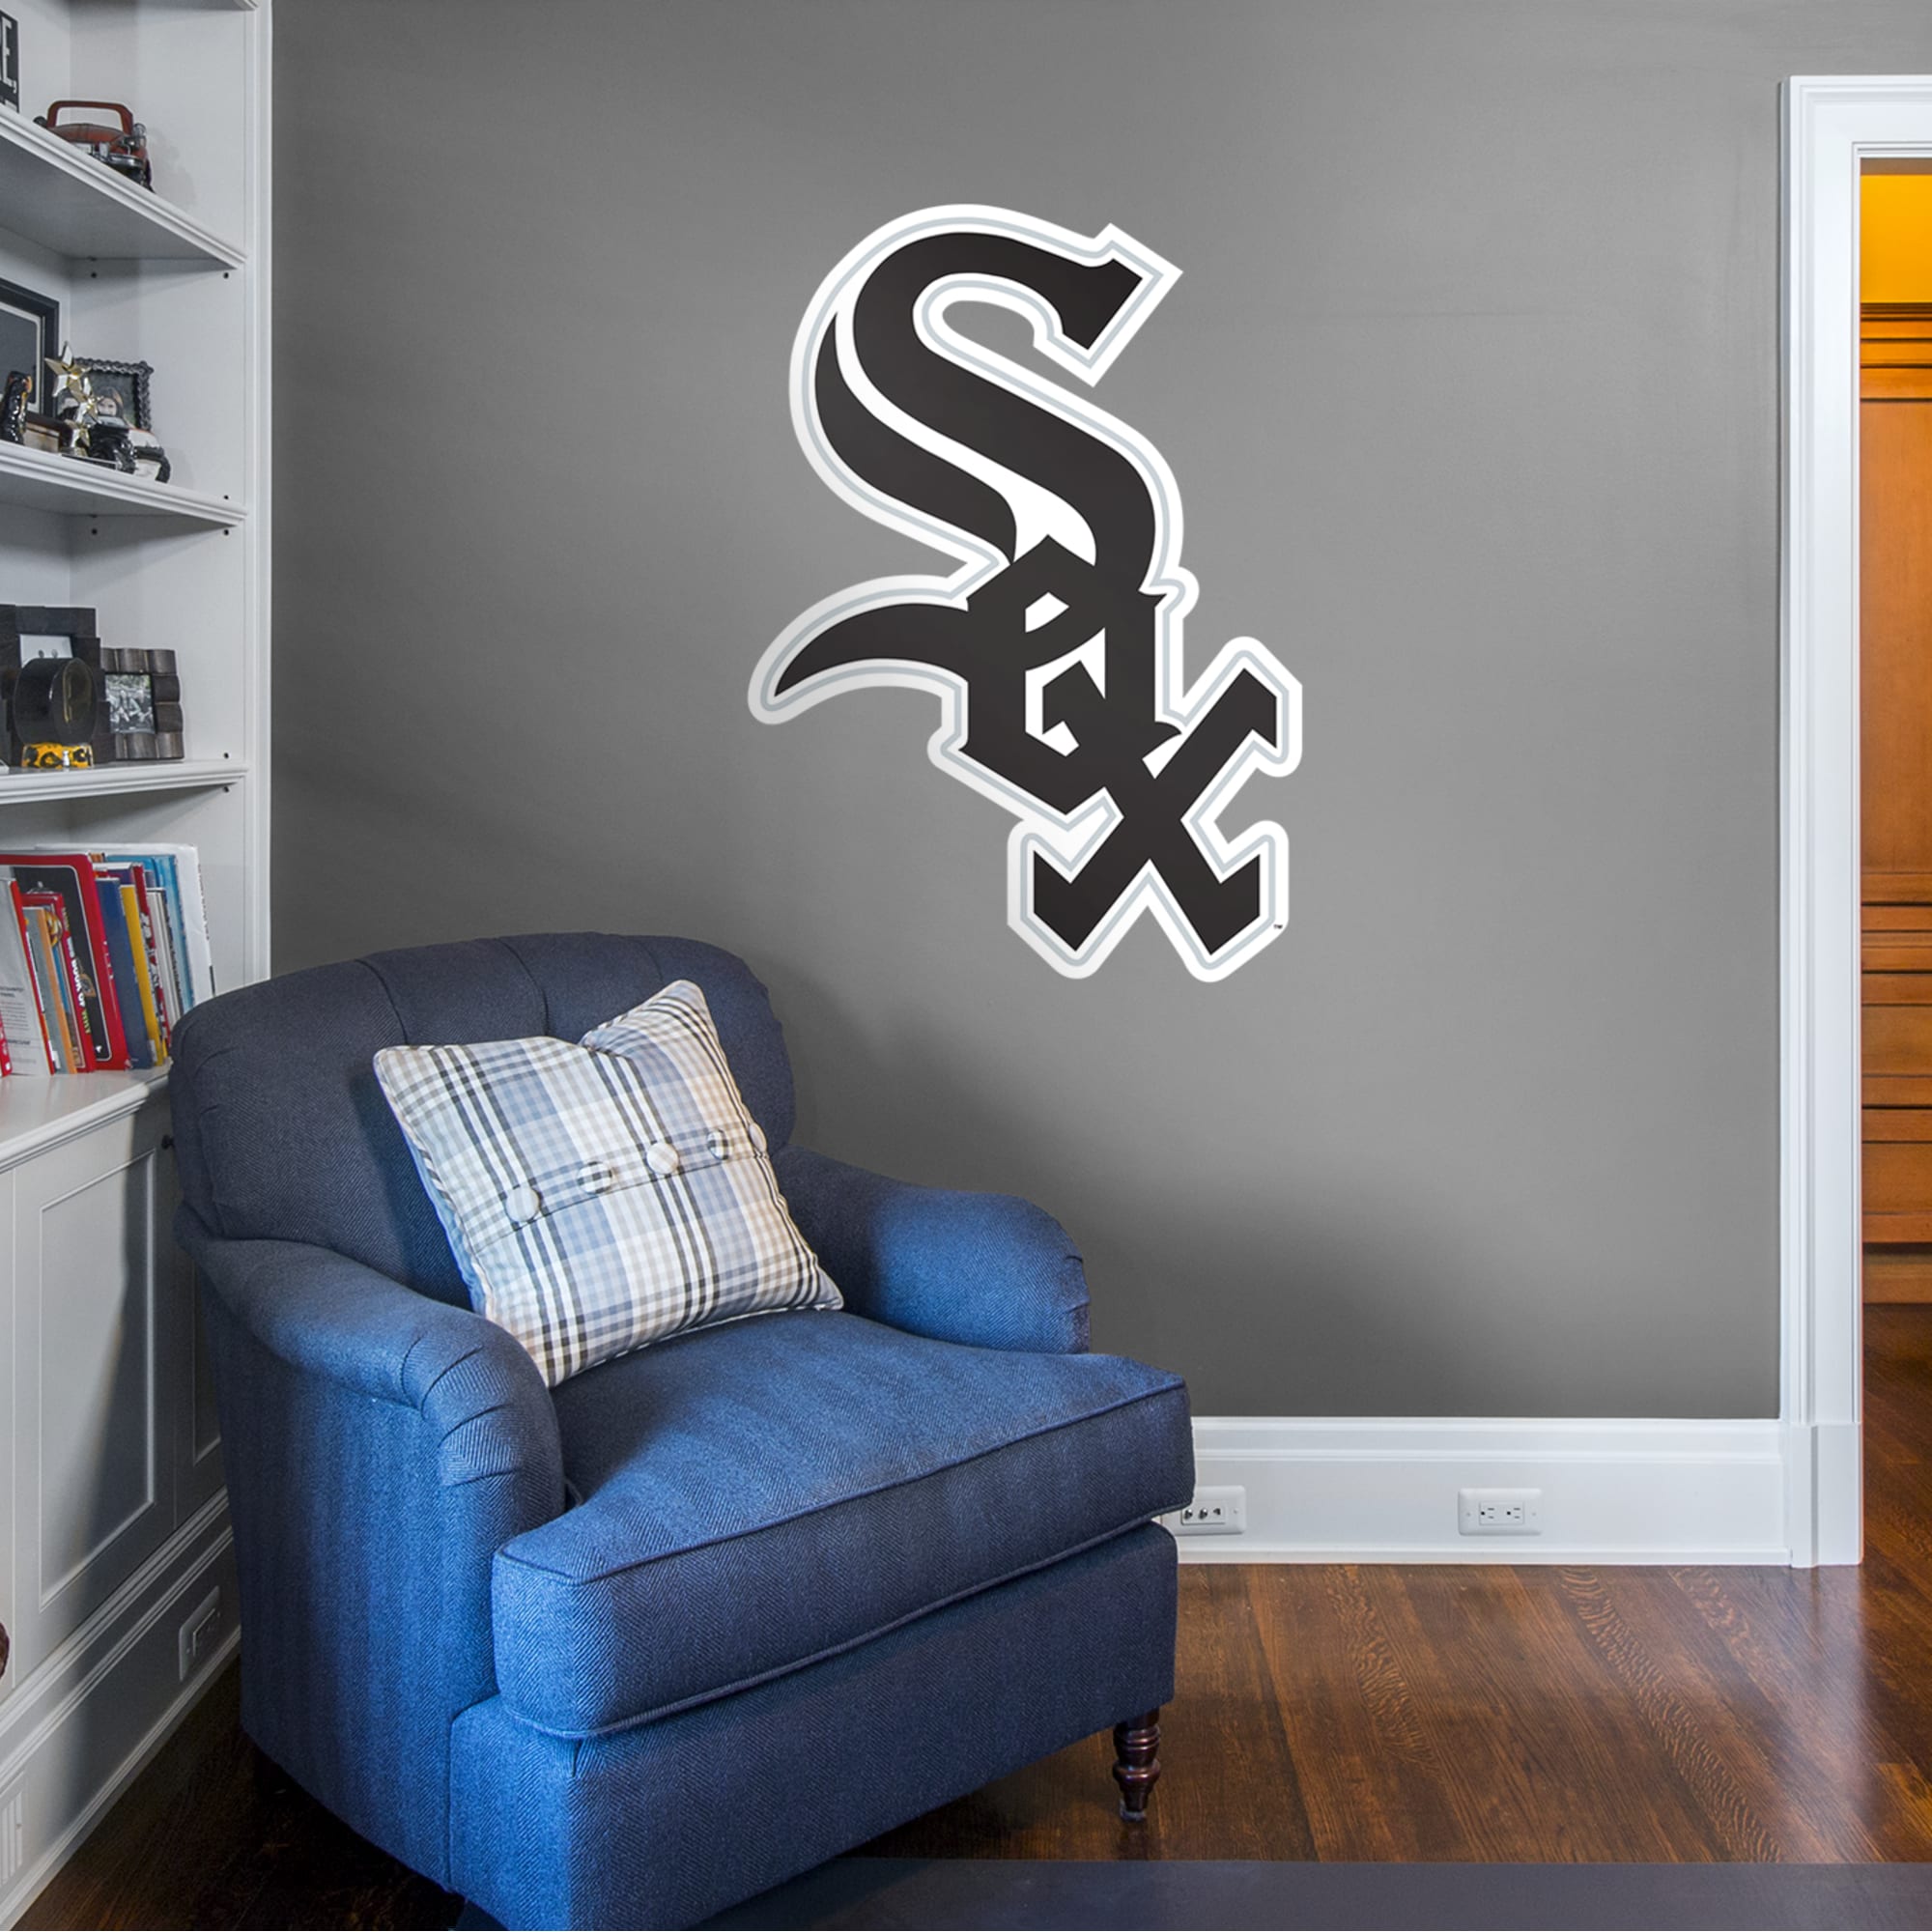 Chicago White Sox: Logo - Officially Licensed MLB Removable Wall Decal Giant Logo (32"W x 45"H) by Fathead | Vinyl